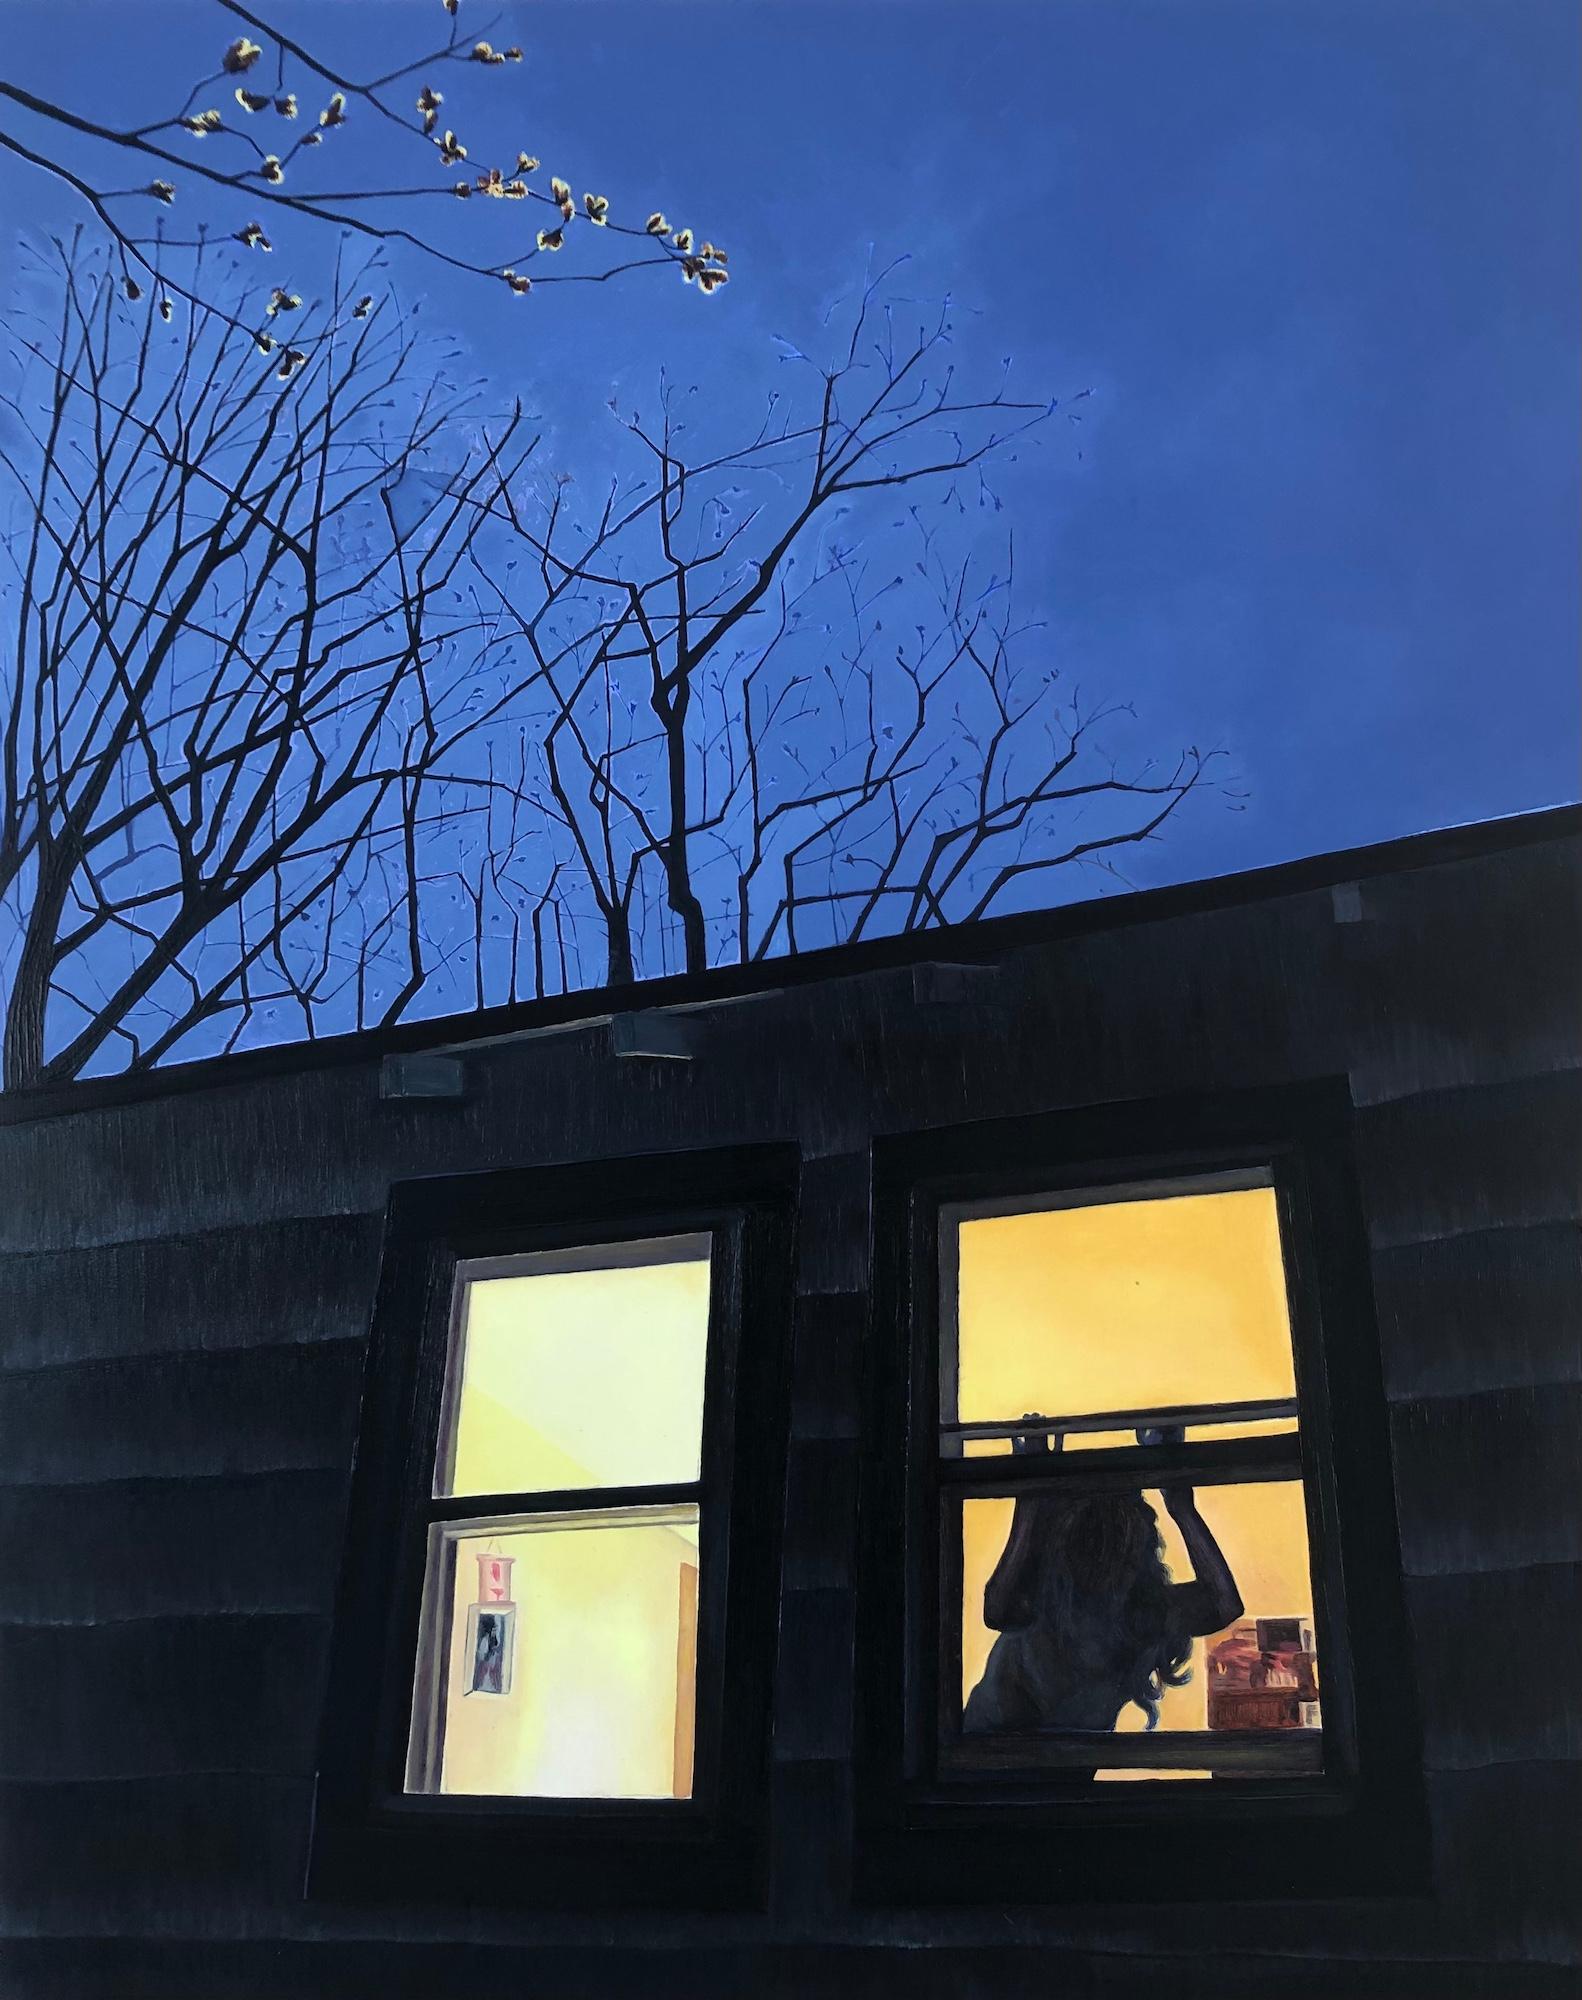 Amanda Acker Figurative Painting - Spring Chill, Female Figure in Window, House at Night, Blue, Black Tree Branches